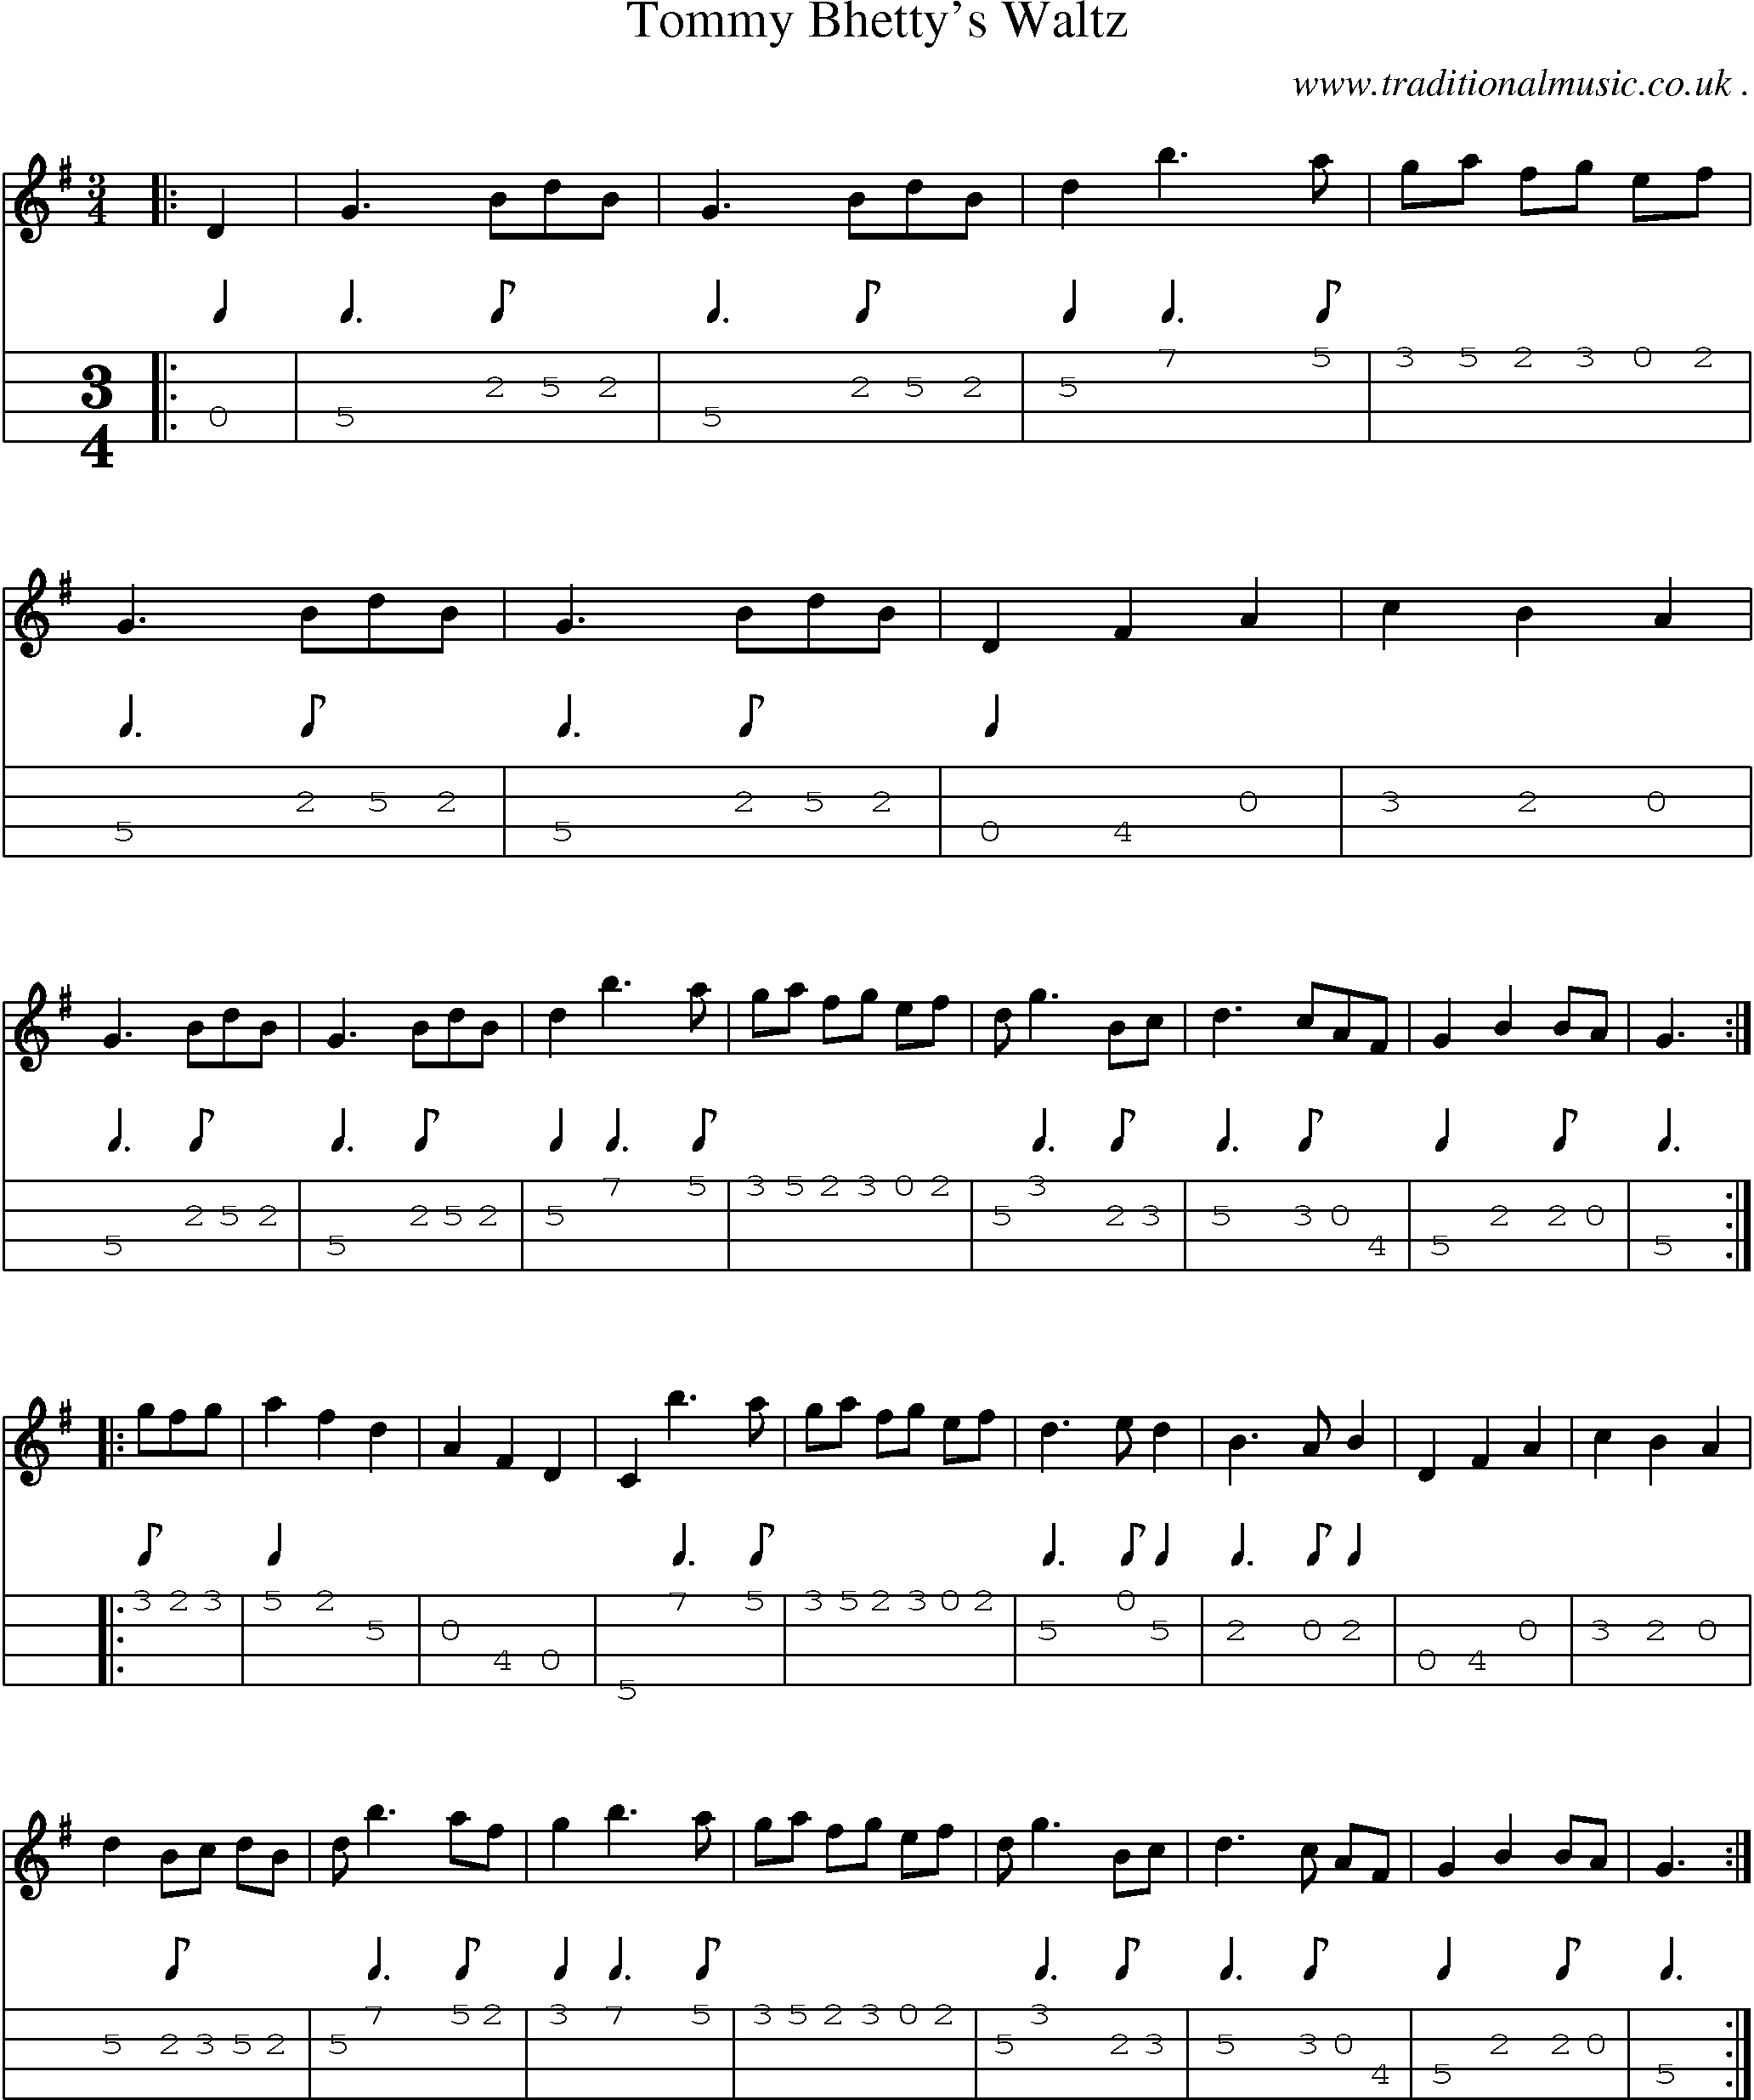 Music Score and Mandolin Tabs for Tommy Bhettys Waltz